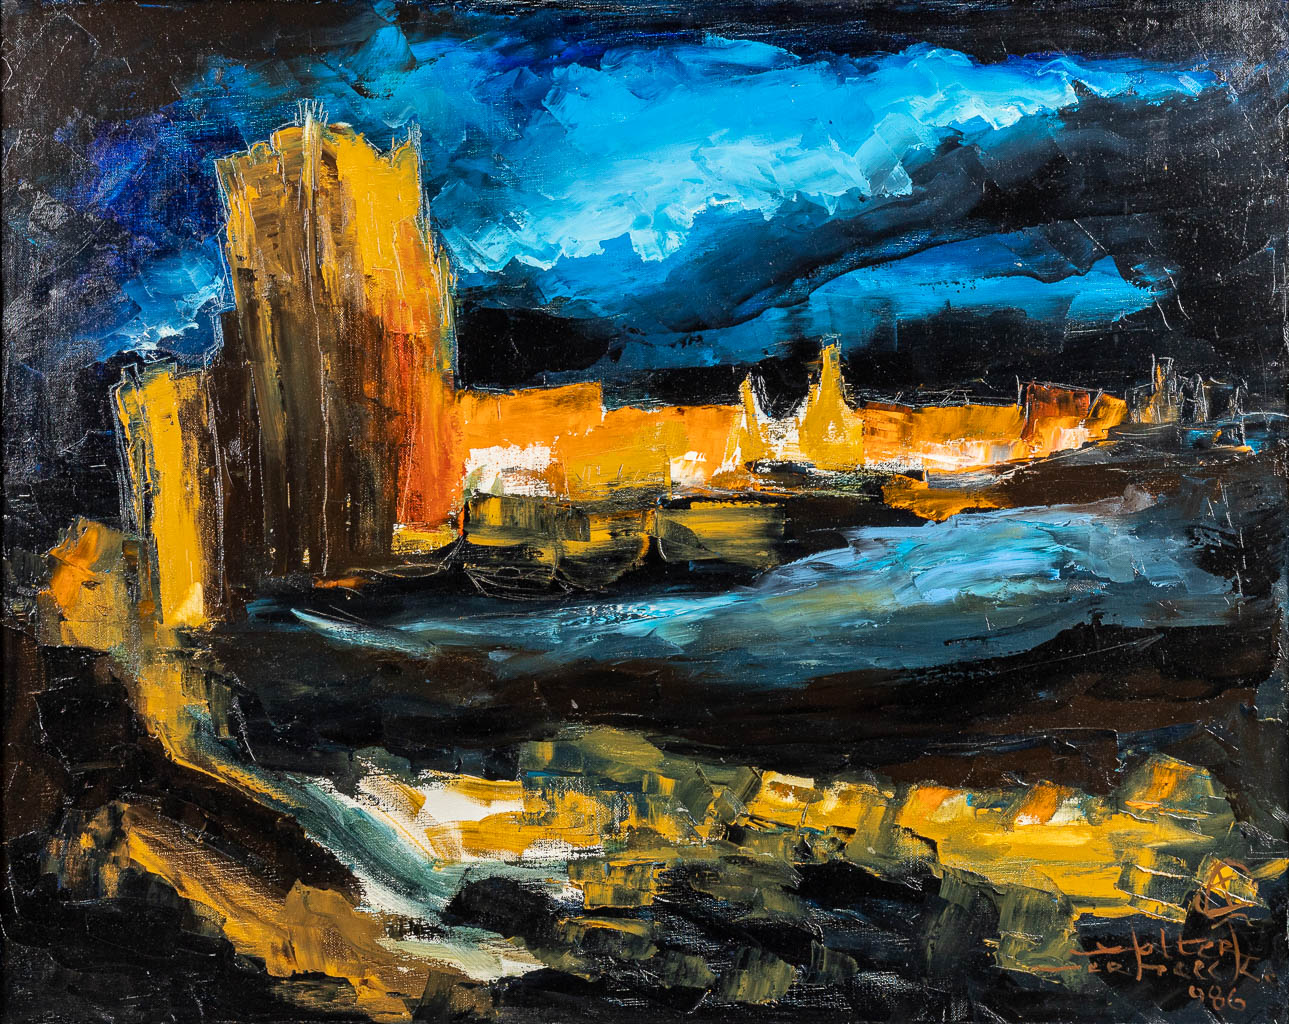 Walter VERBRAECKE (XX) Abstract Village View 'Lisseweghe', dated 1986. (100 x 80 cm)